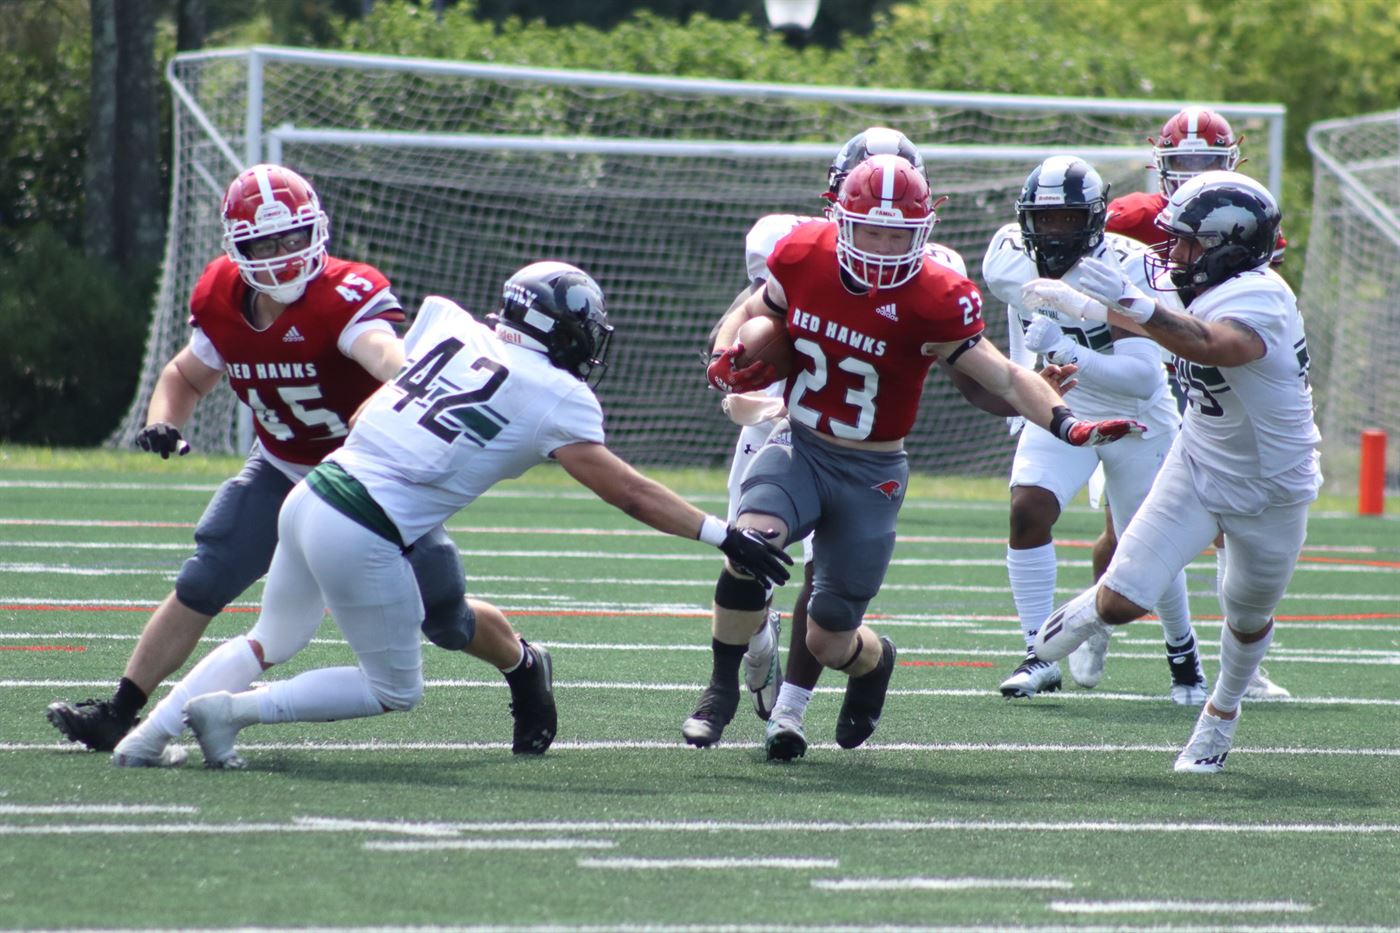 Dan Ramos has already started to make a name for himself as a Red Hawk both as a running back and as a kick returner. Trevor Geisberg | The Montclarion